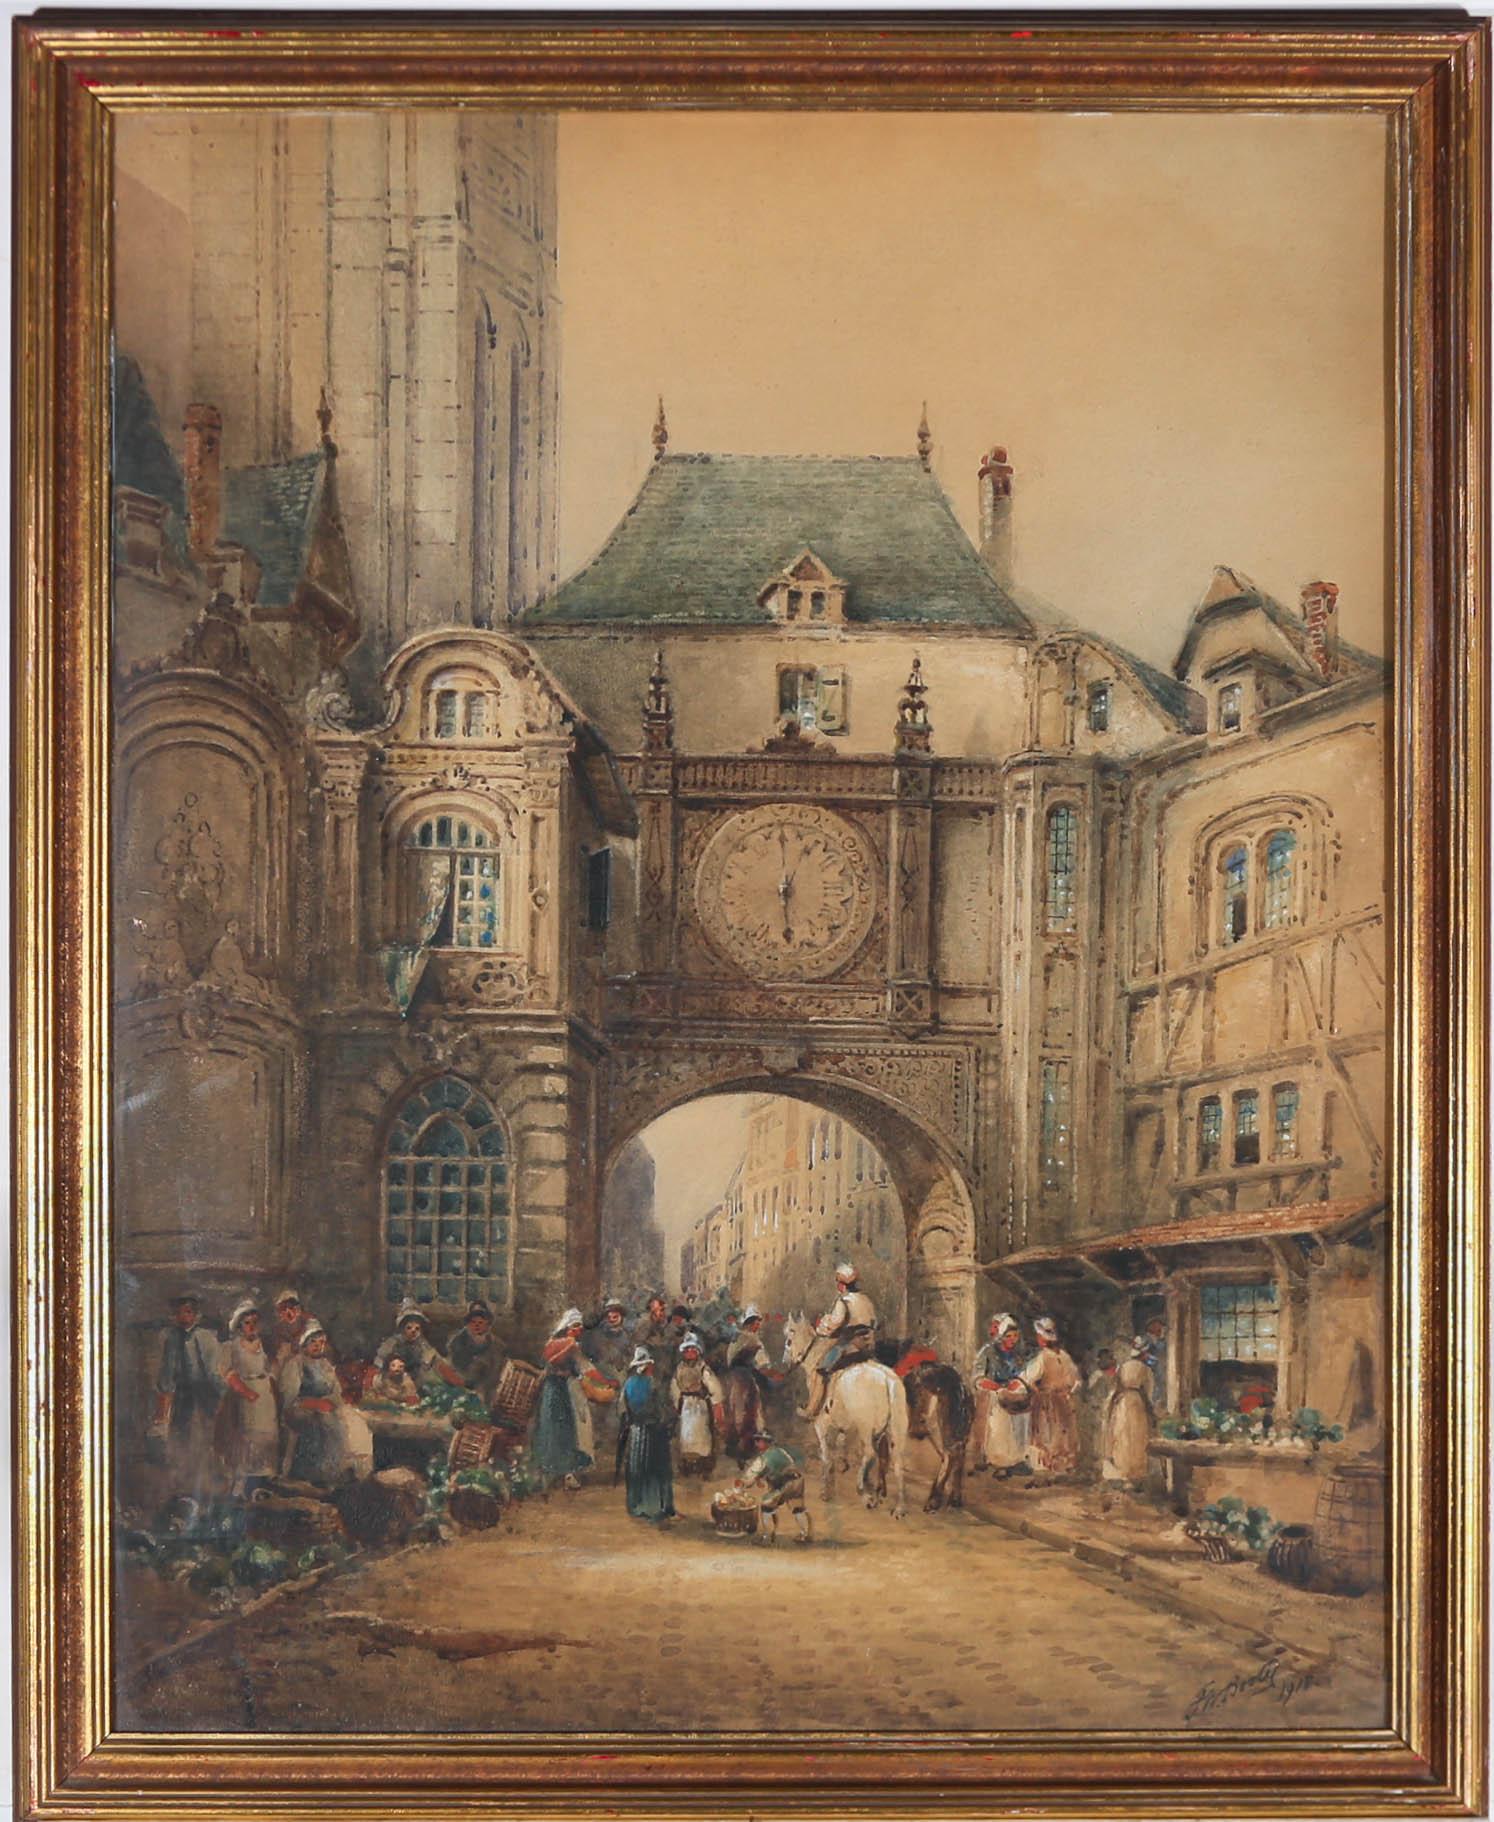 A charming watercolour scene by British artist Frederick William Booty (1840-1924), depicting the bustling streets of Rouen. Dominating the artist's paper is a detailed study of the Gros-Horloge. A 14th century astronomical clock found in the city's